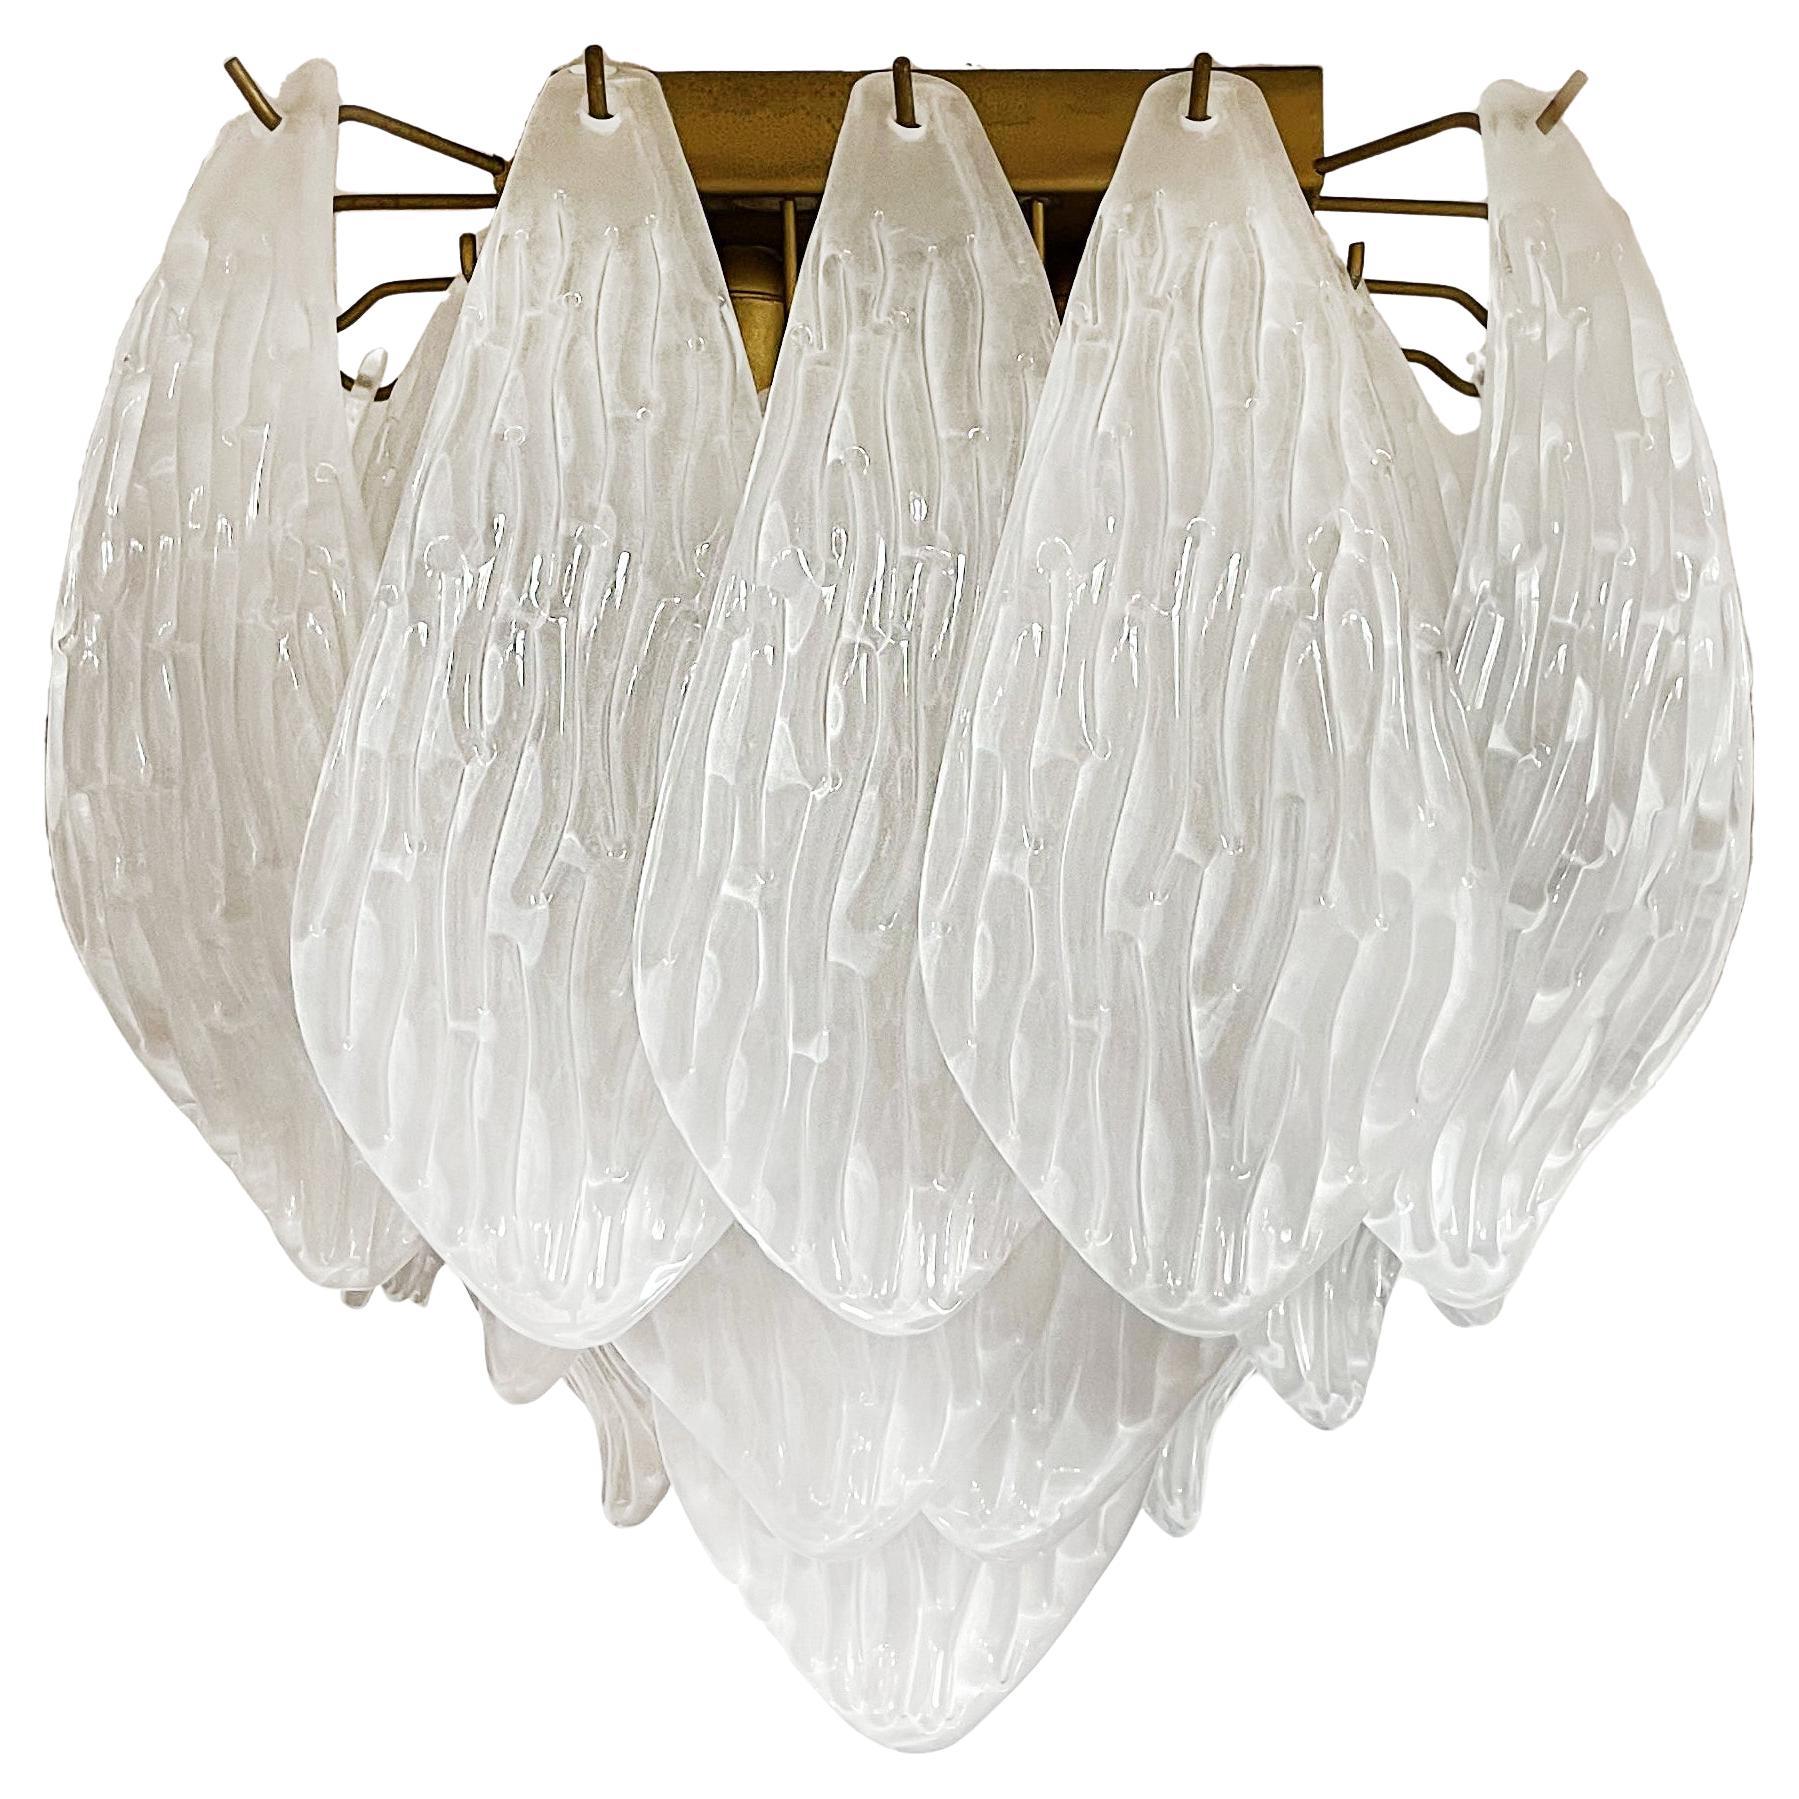 Wonderful Murano ceiling lamp - frosted carved glass leaves For Sale